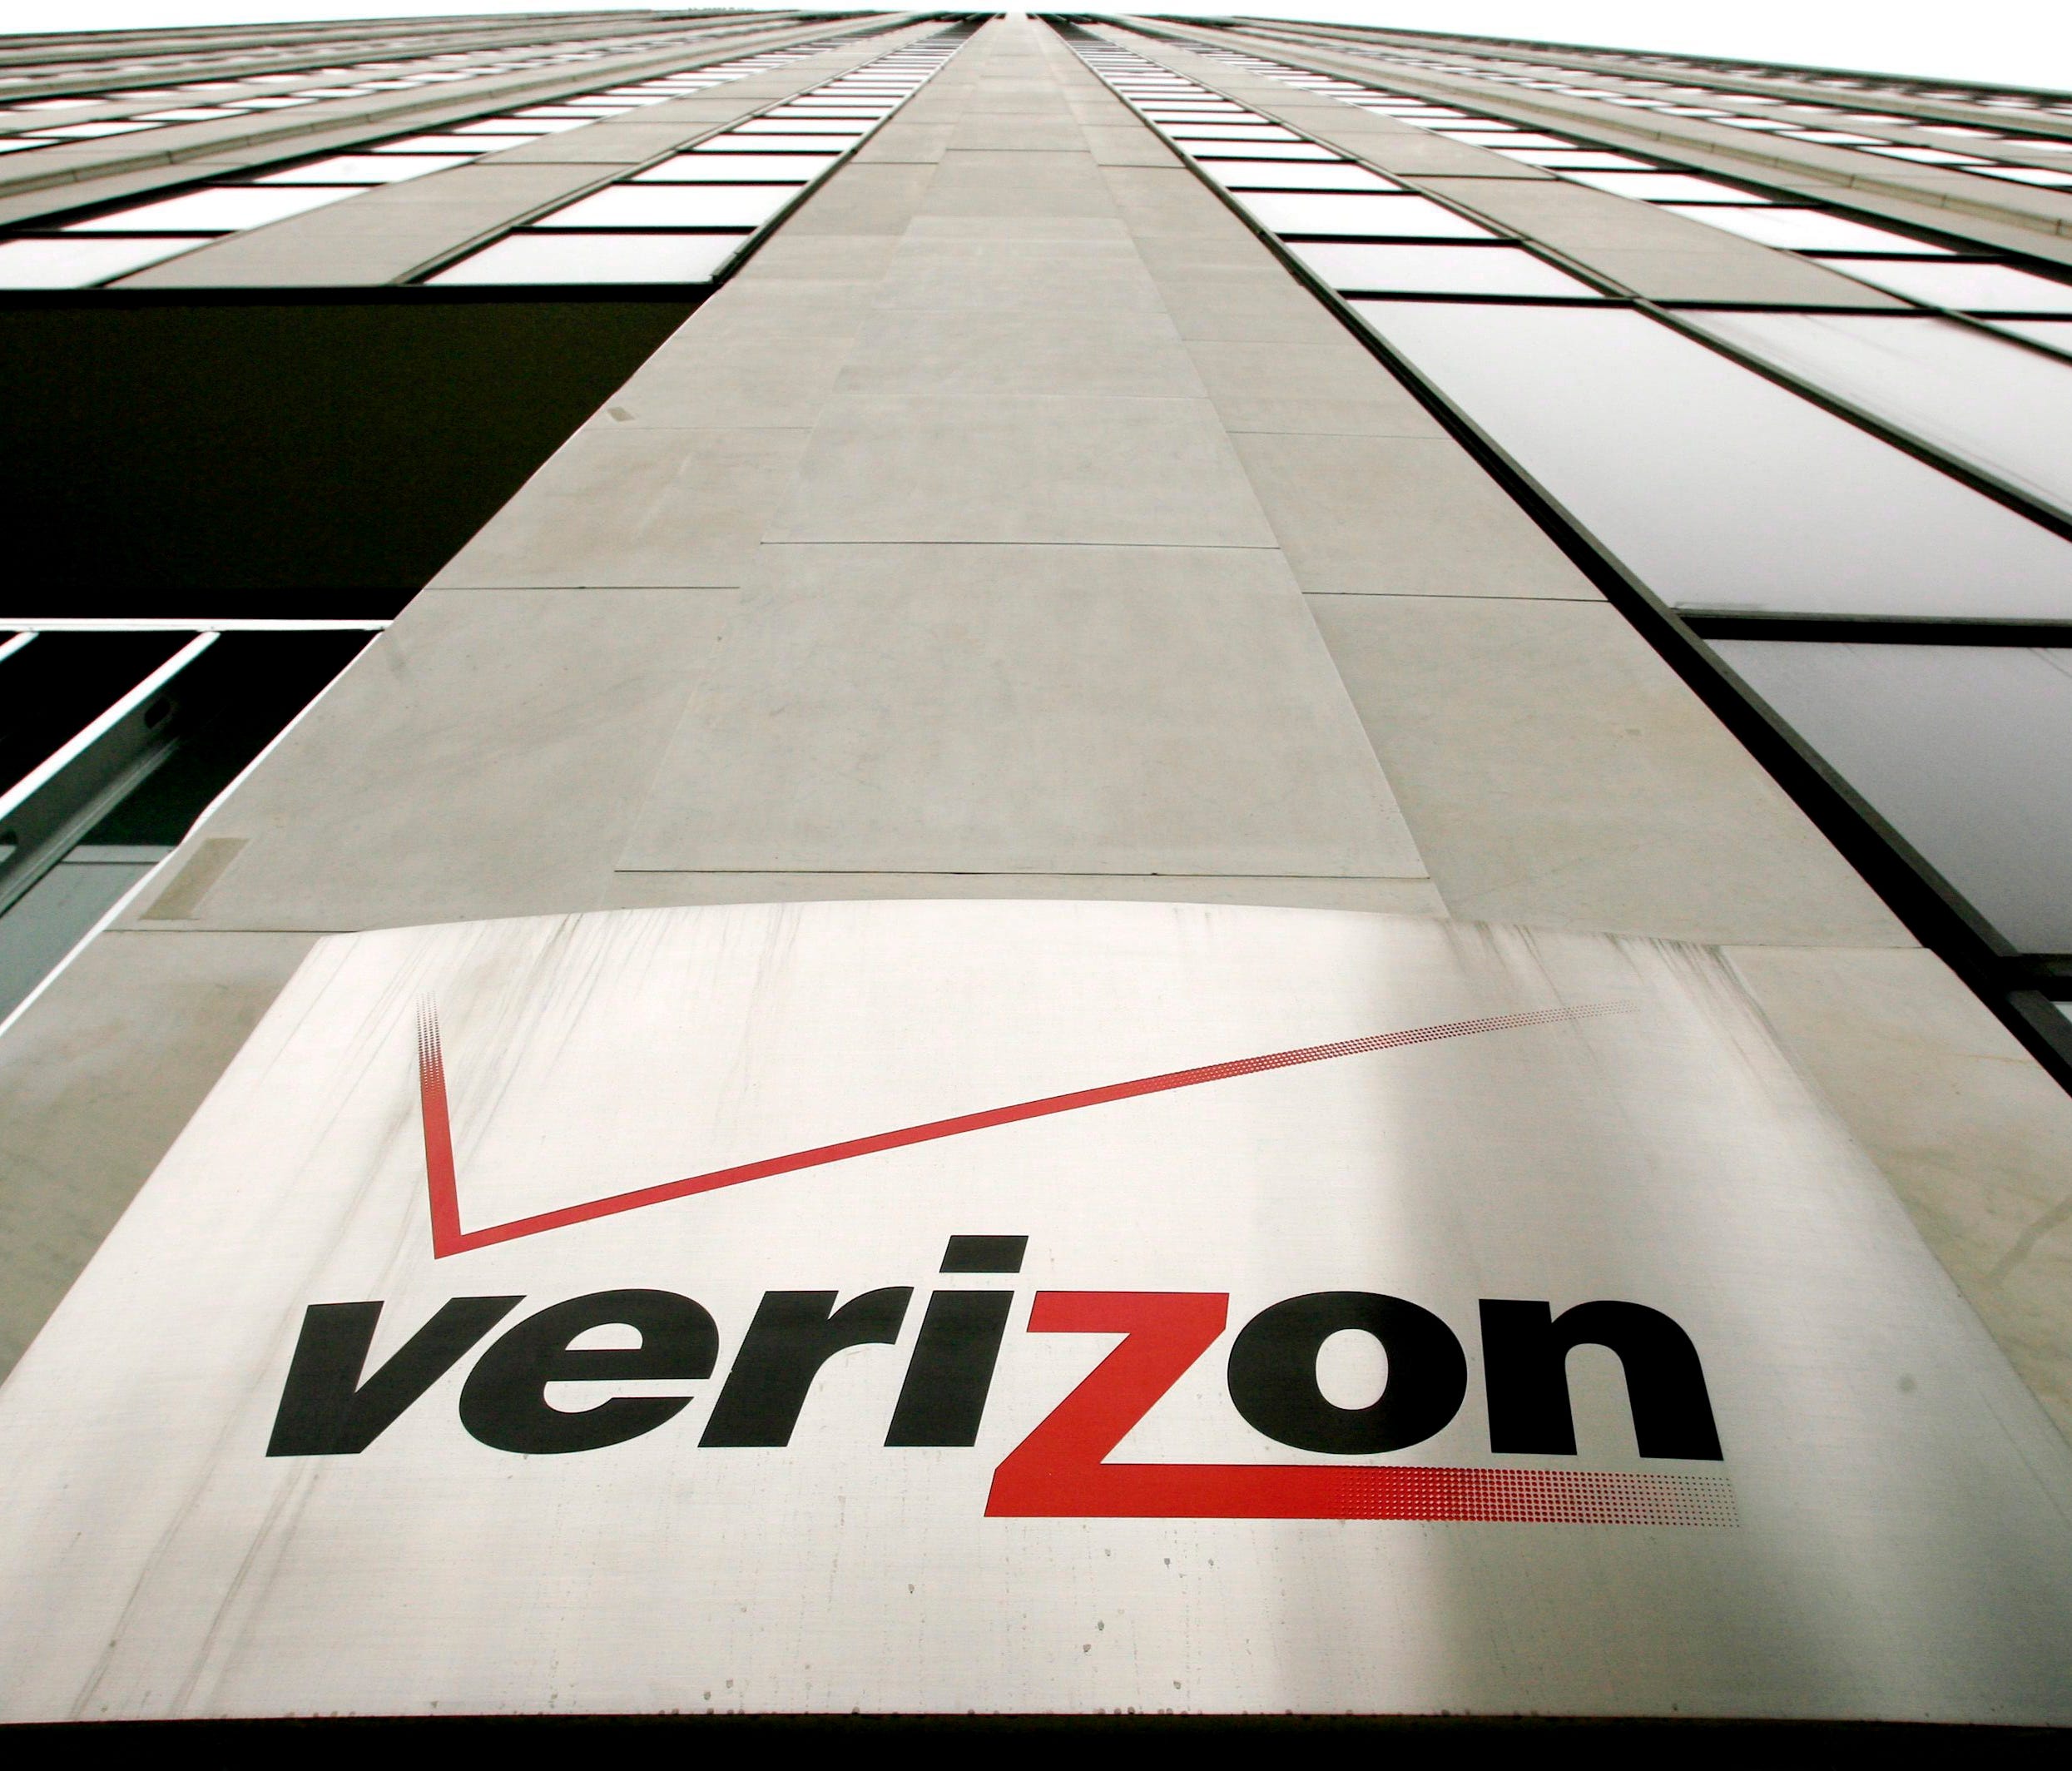 File photo taken in 2006 shows a sign on the side of one of the Verizon buildings in New York.